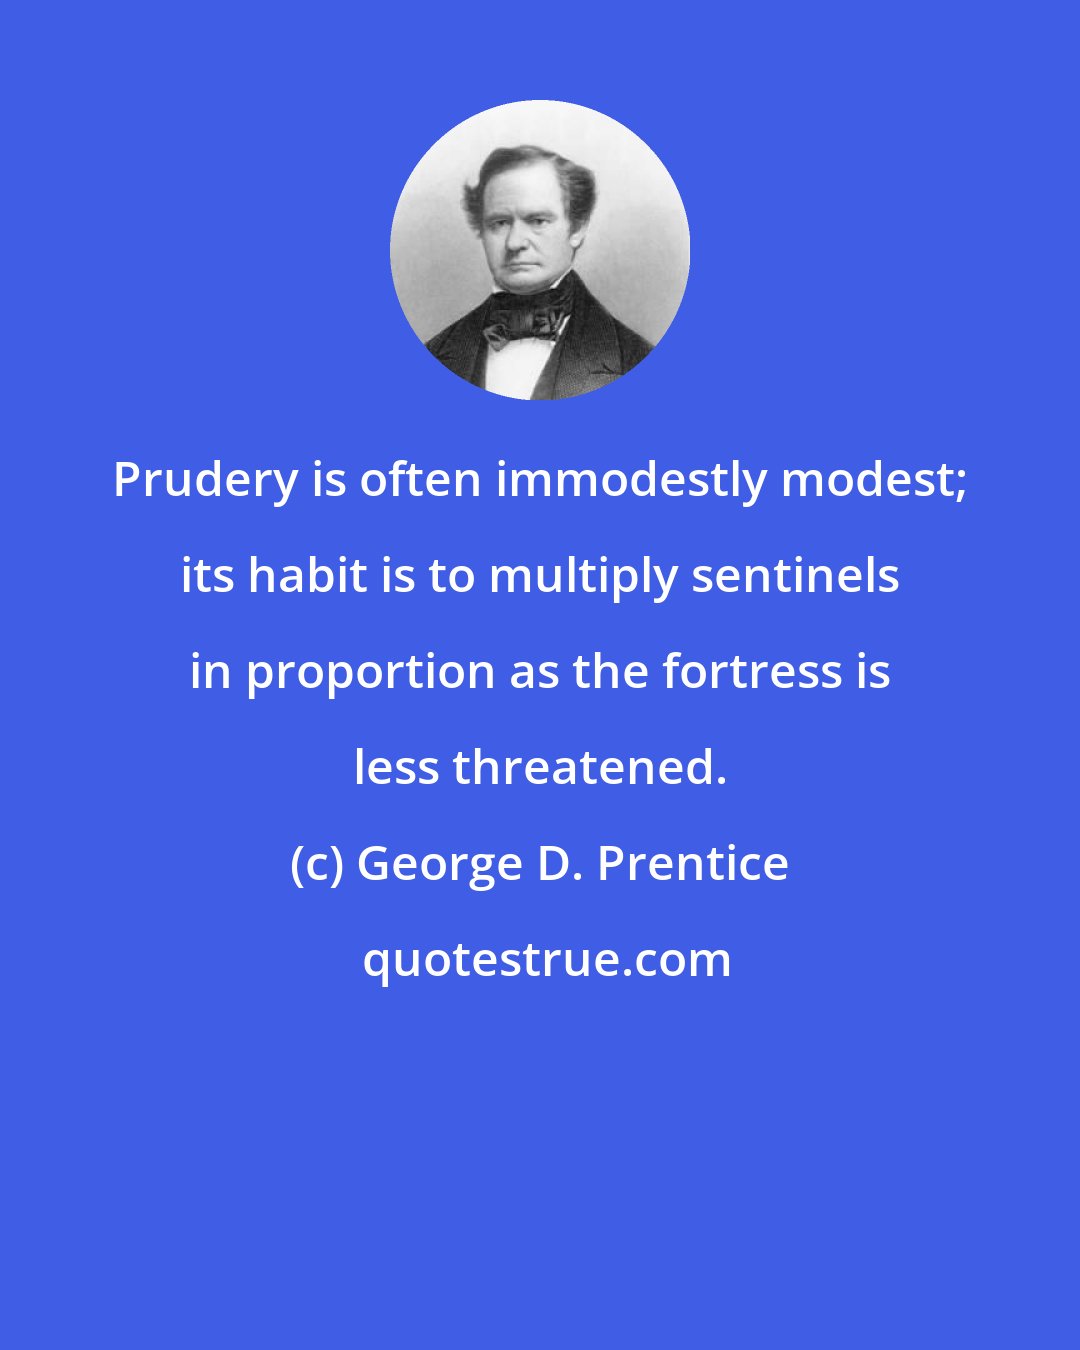 George D. Prentice: Prudery is often immodestly modest; its habit is to multiply sentinels in proportion as the fortress is less threatened.